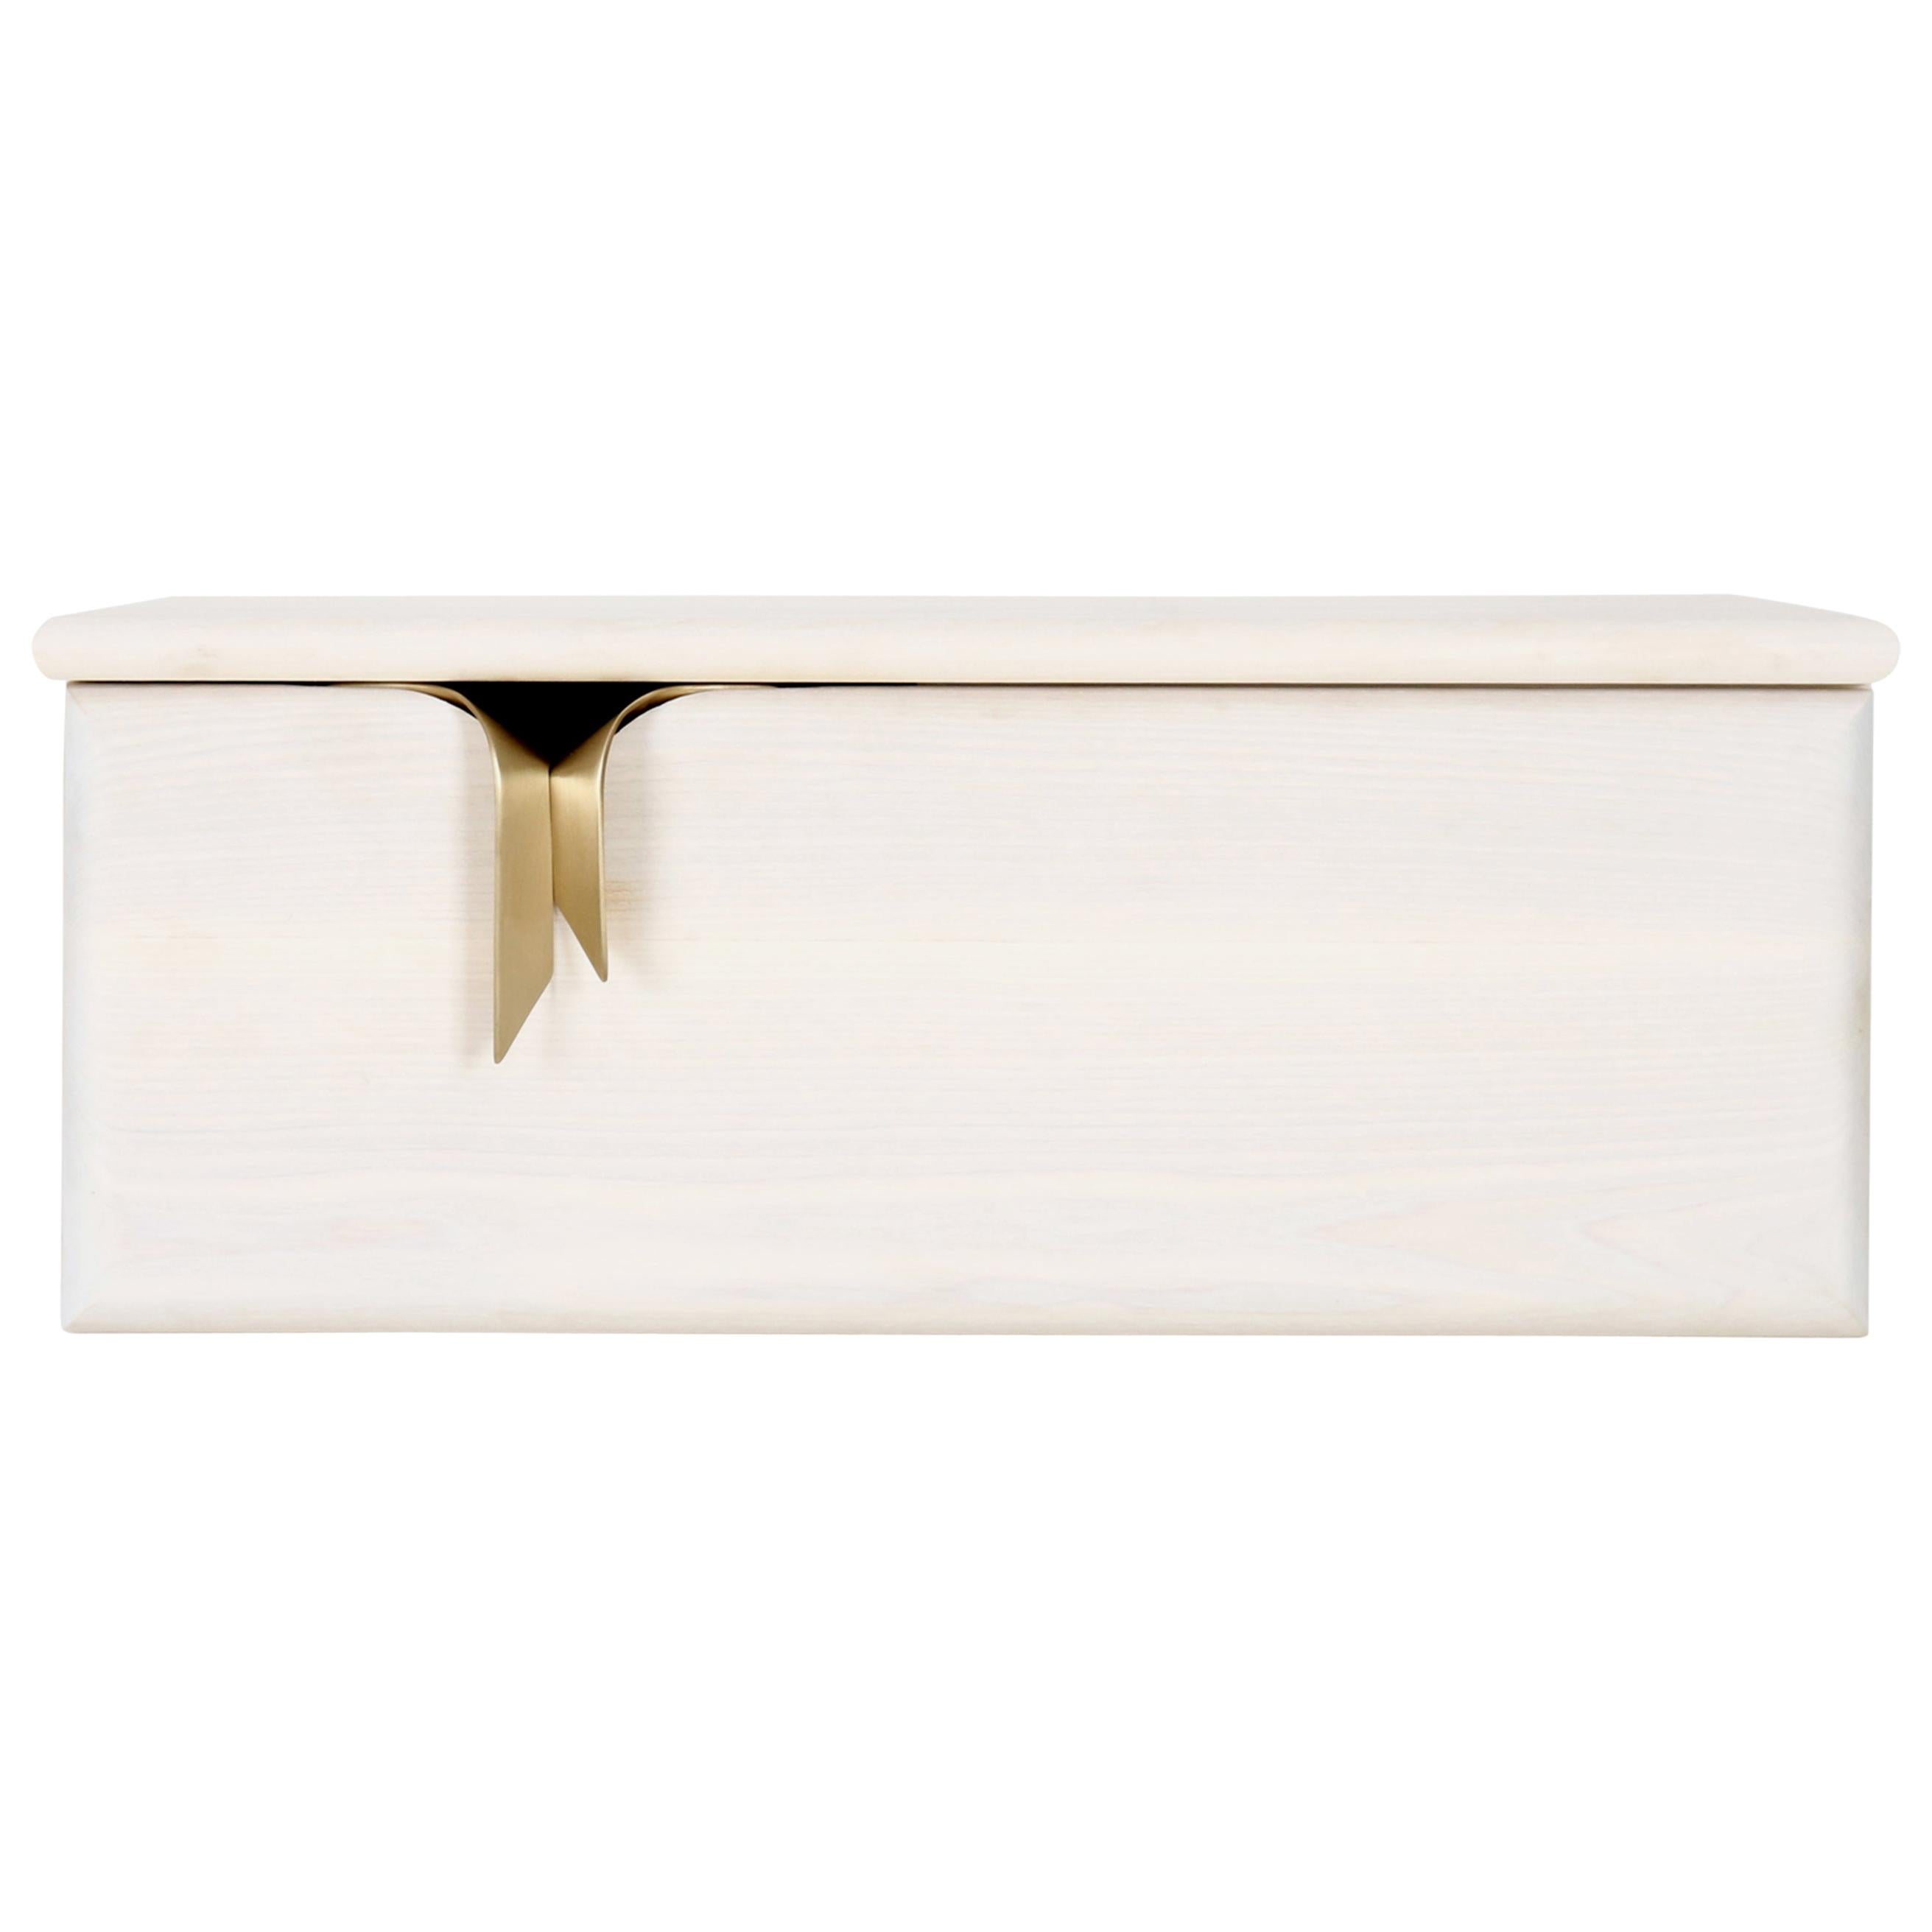 Ribbon Wall Mounted 1DR Bedside Table, Ivory Wood, Bronze Hardware by Debra Folz